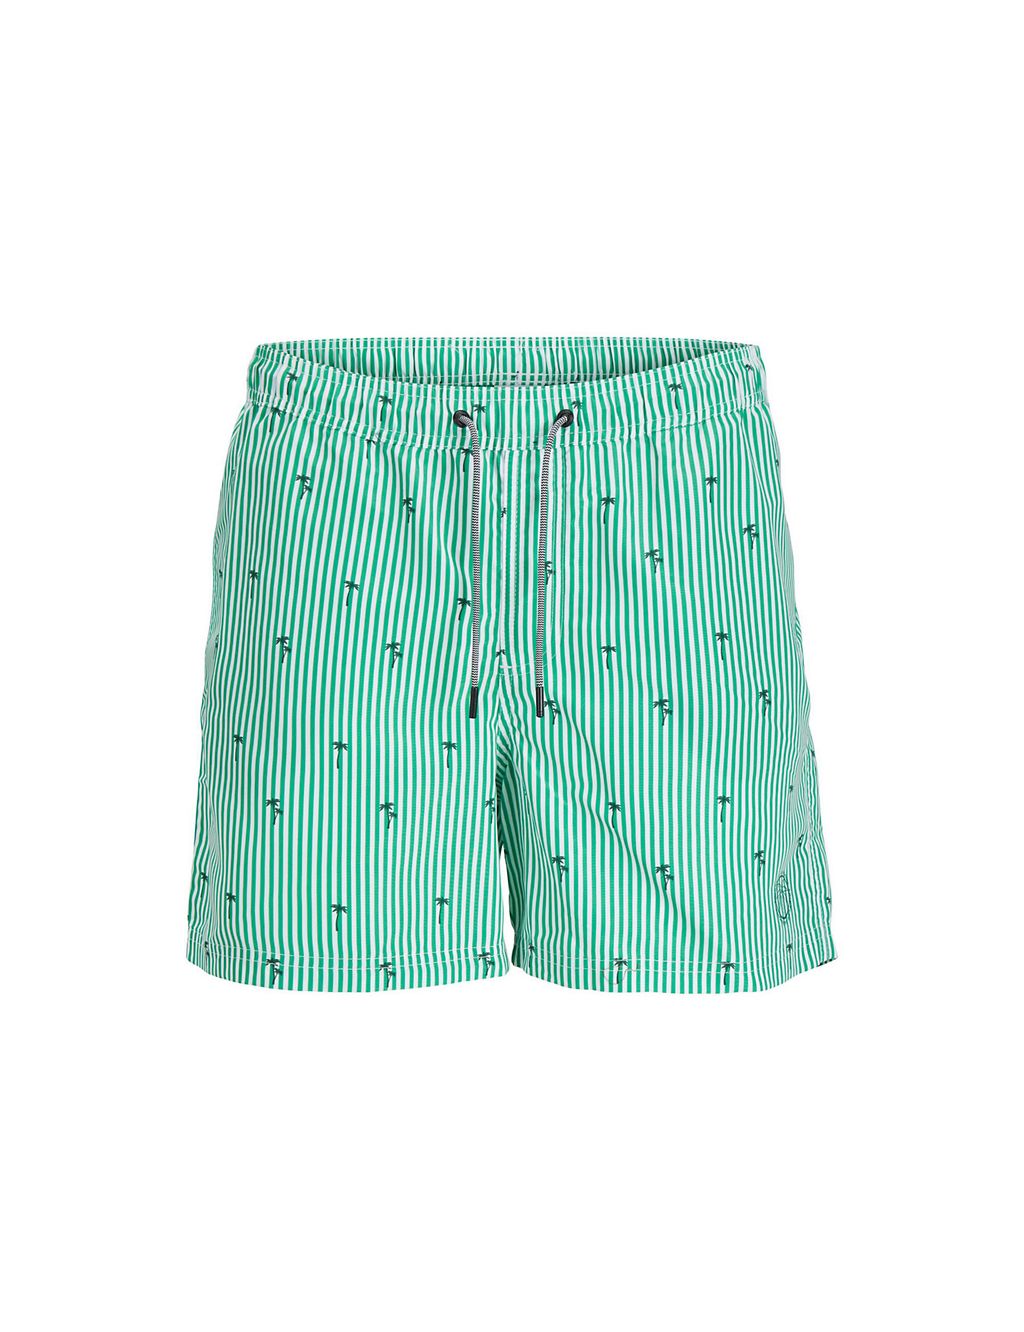 Striped Embroidered Swim Shorts 1 of 4